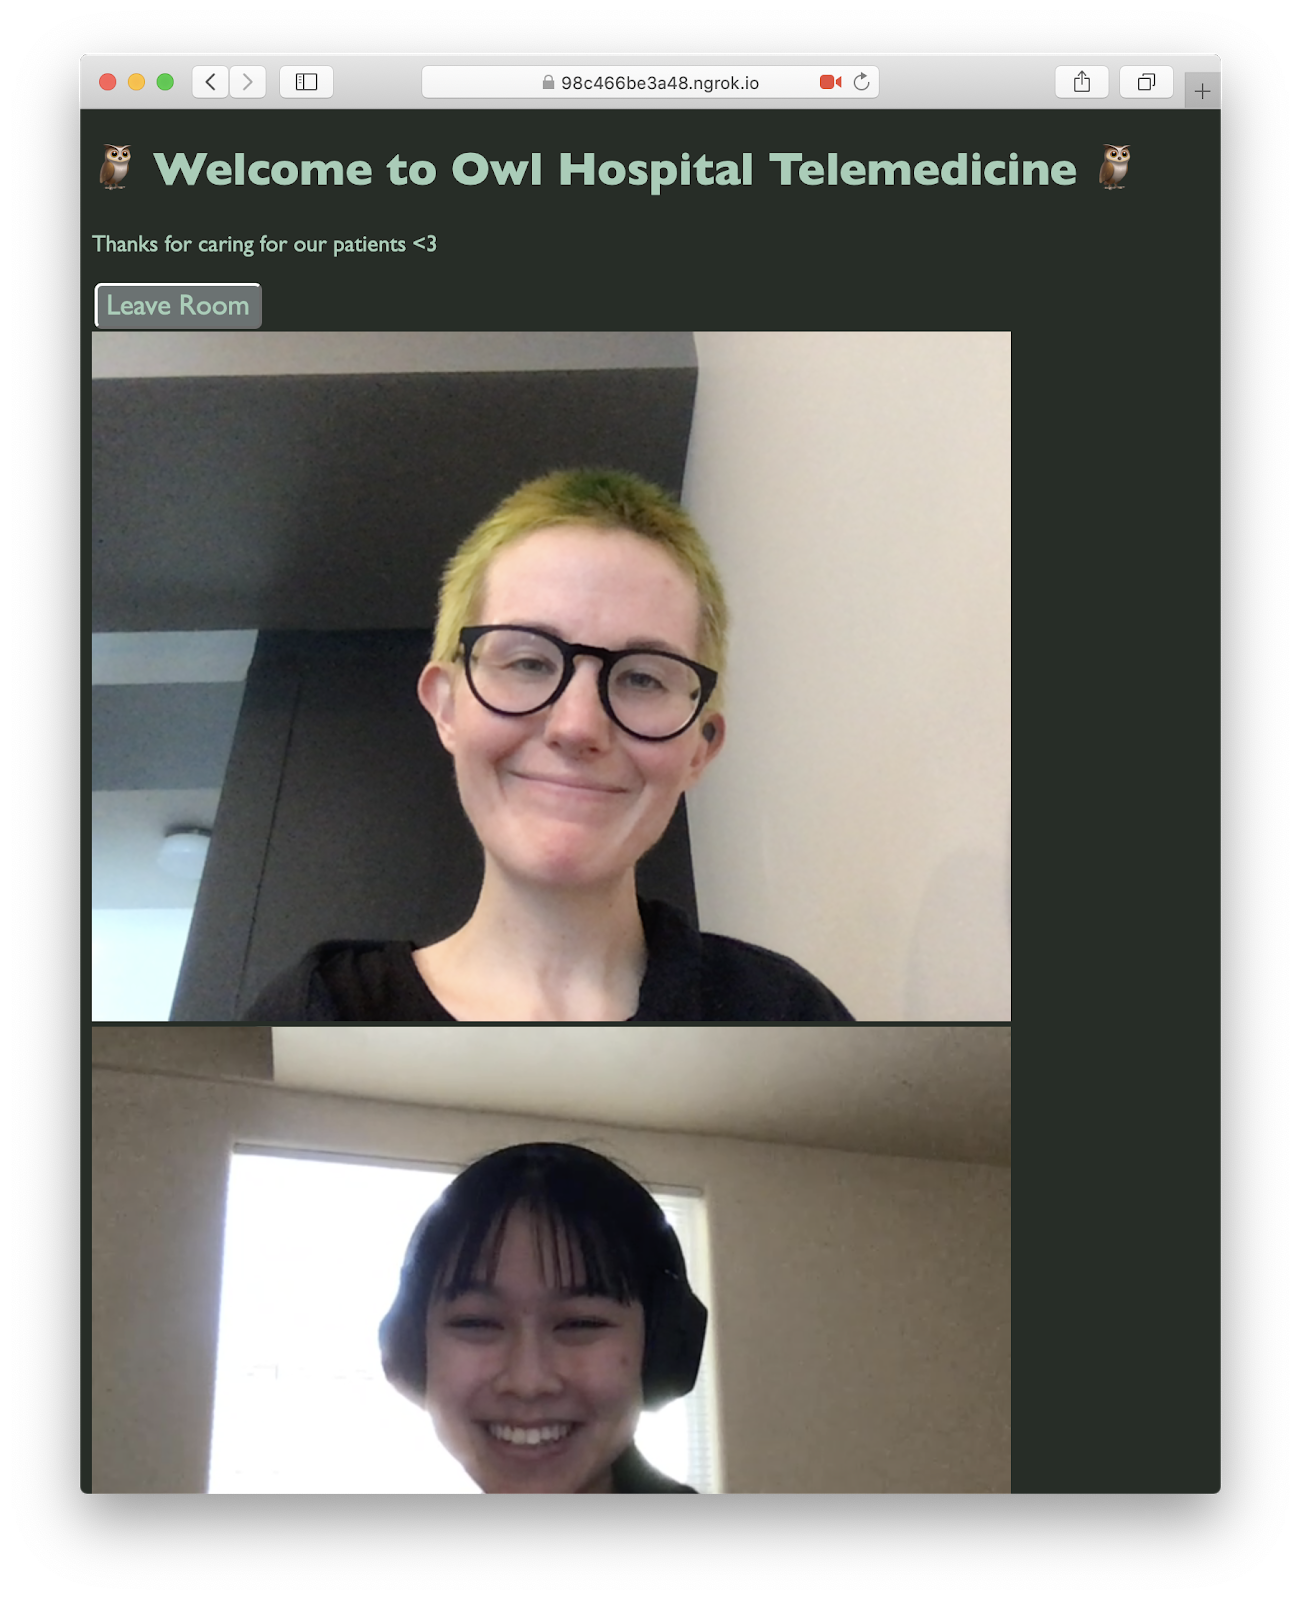 Screenshot of a telemedicine app. The text says "Welcome to Owl Hospital Telemedicine" and there are 2 smiling, real live people video chatting.